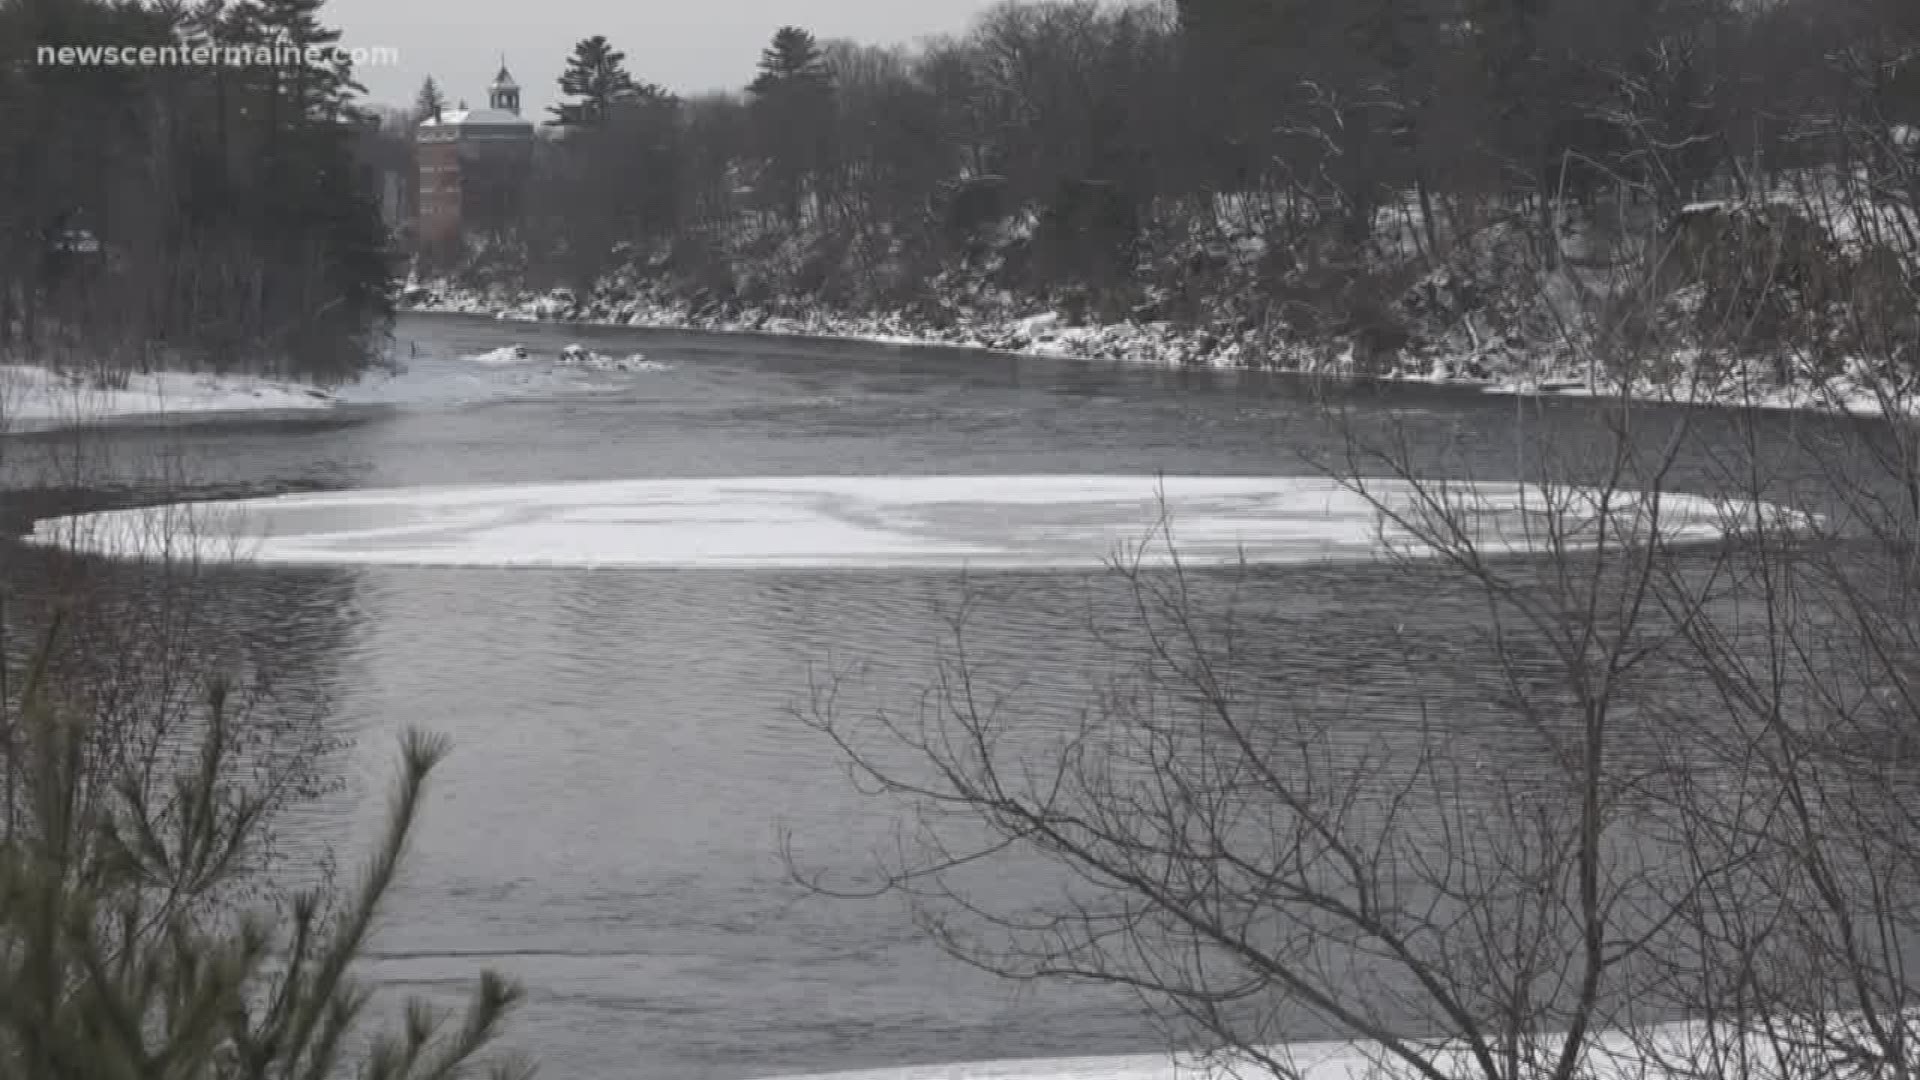 A year after the ice disk in Westbrook captured the world's interest, another disk formed on the Kennebec River in Skowhegan to somewhat less fanfare in Jan. 2020.